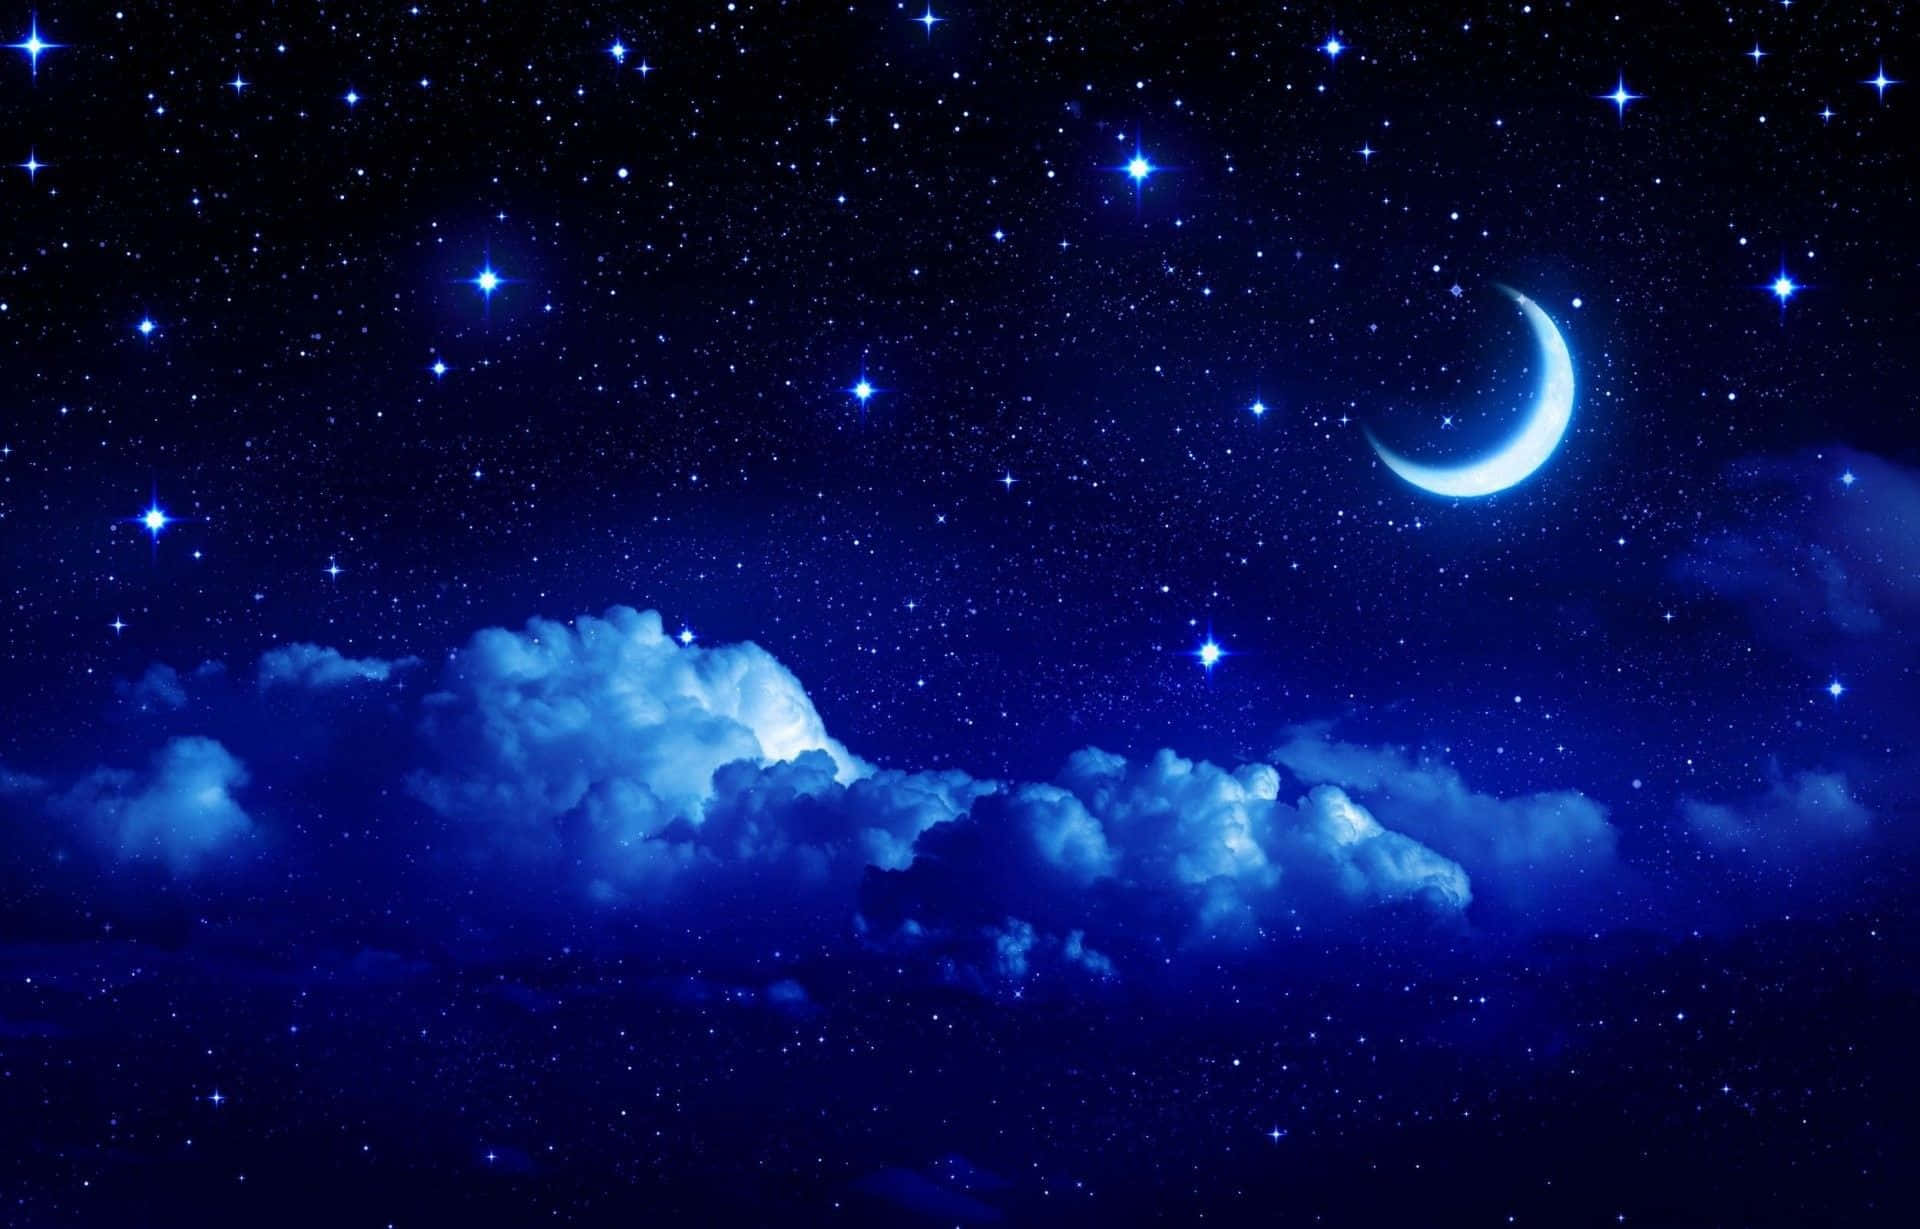 Beautiful Moon and Stars shining brightly in the night sky